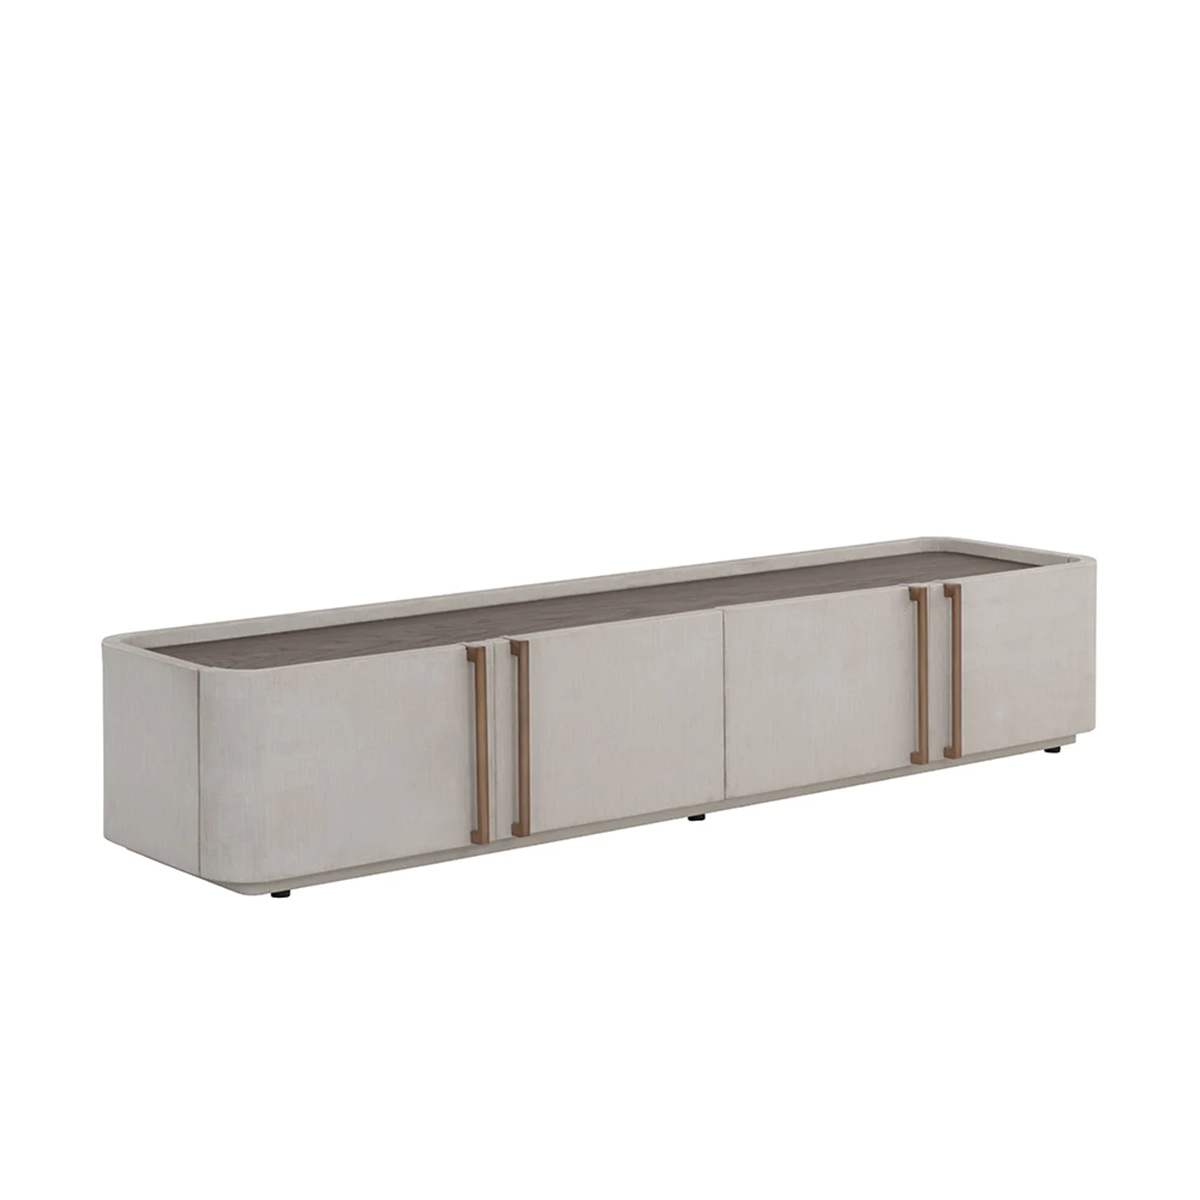 Jamille Media Console and Cabinet by Sunpan